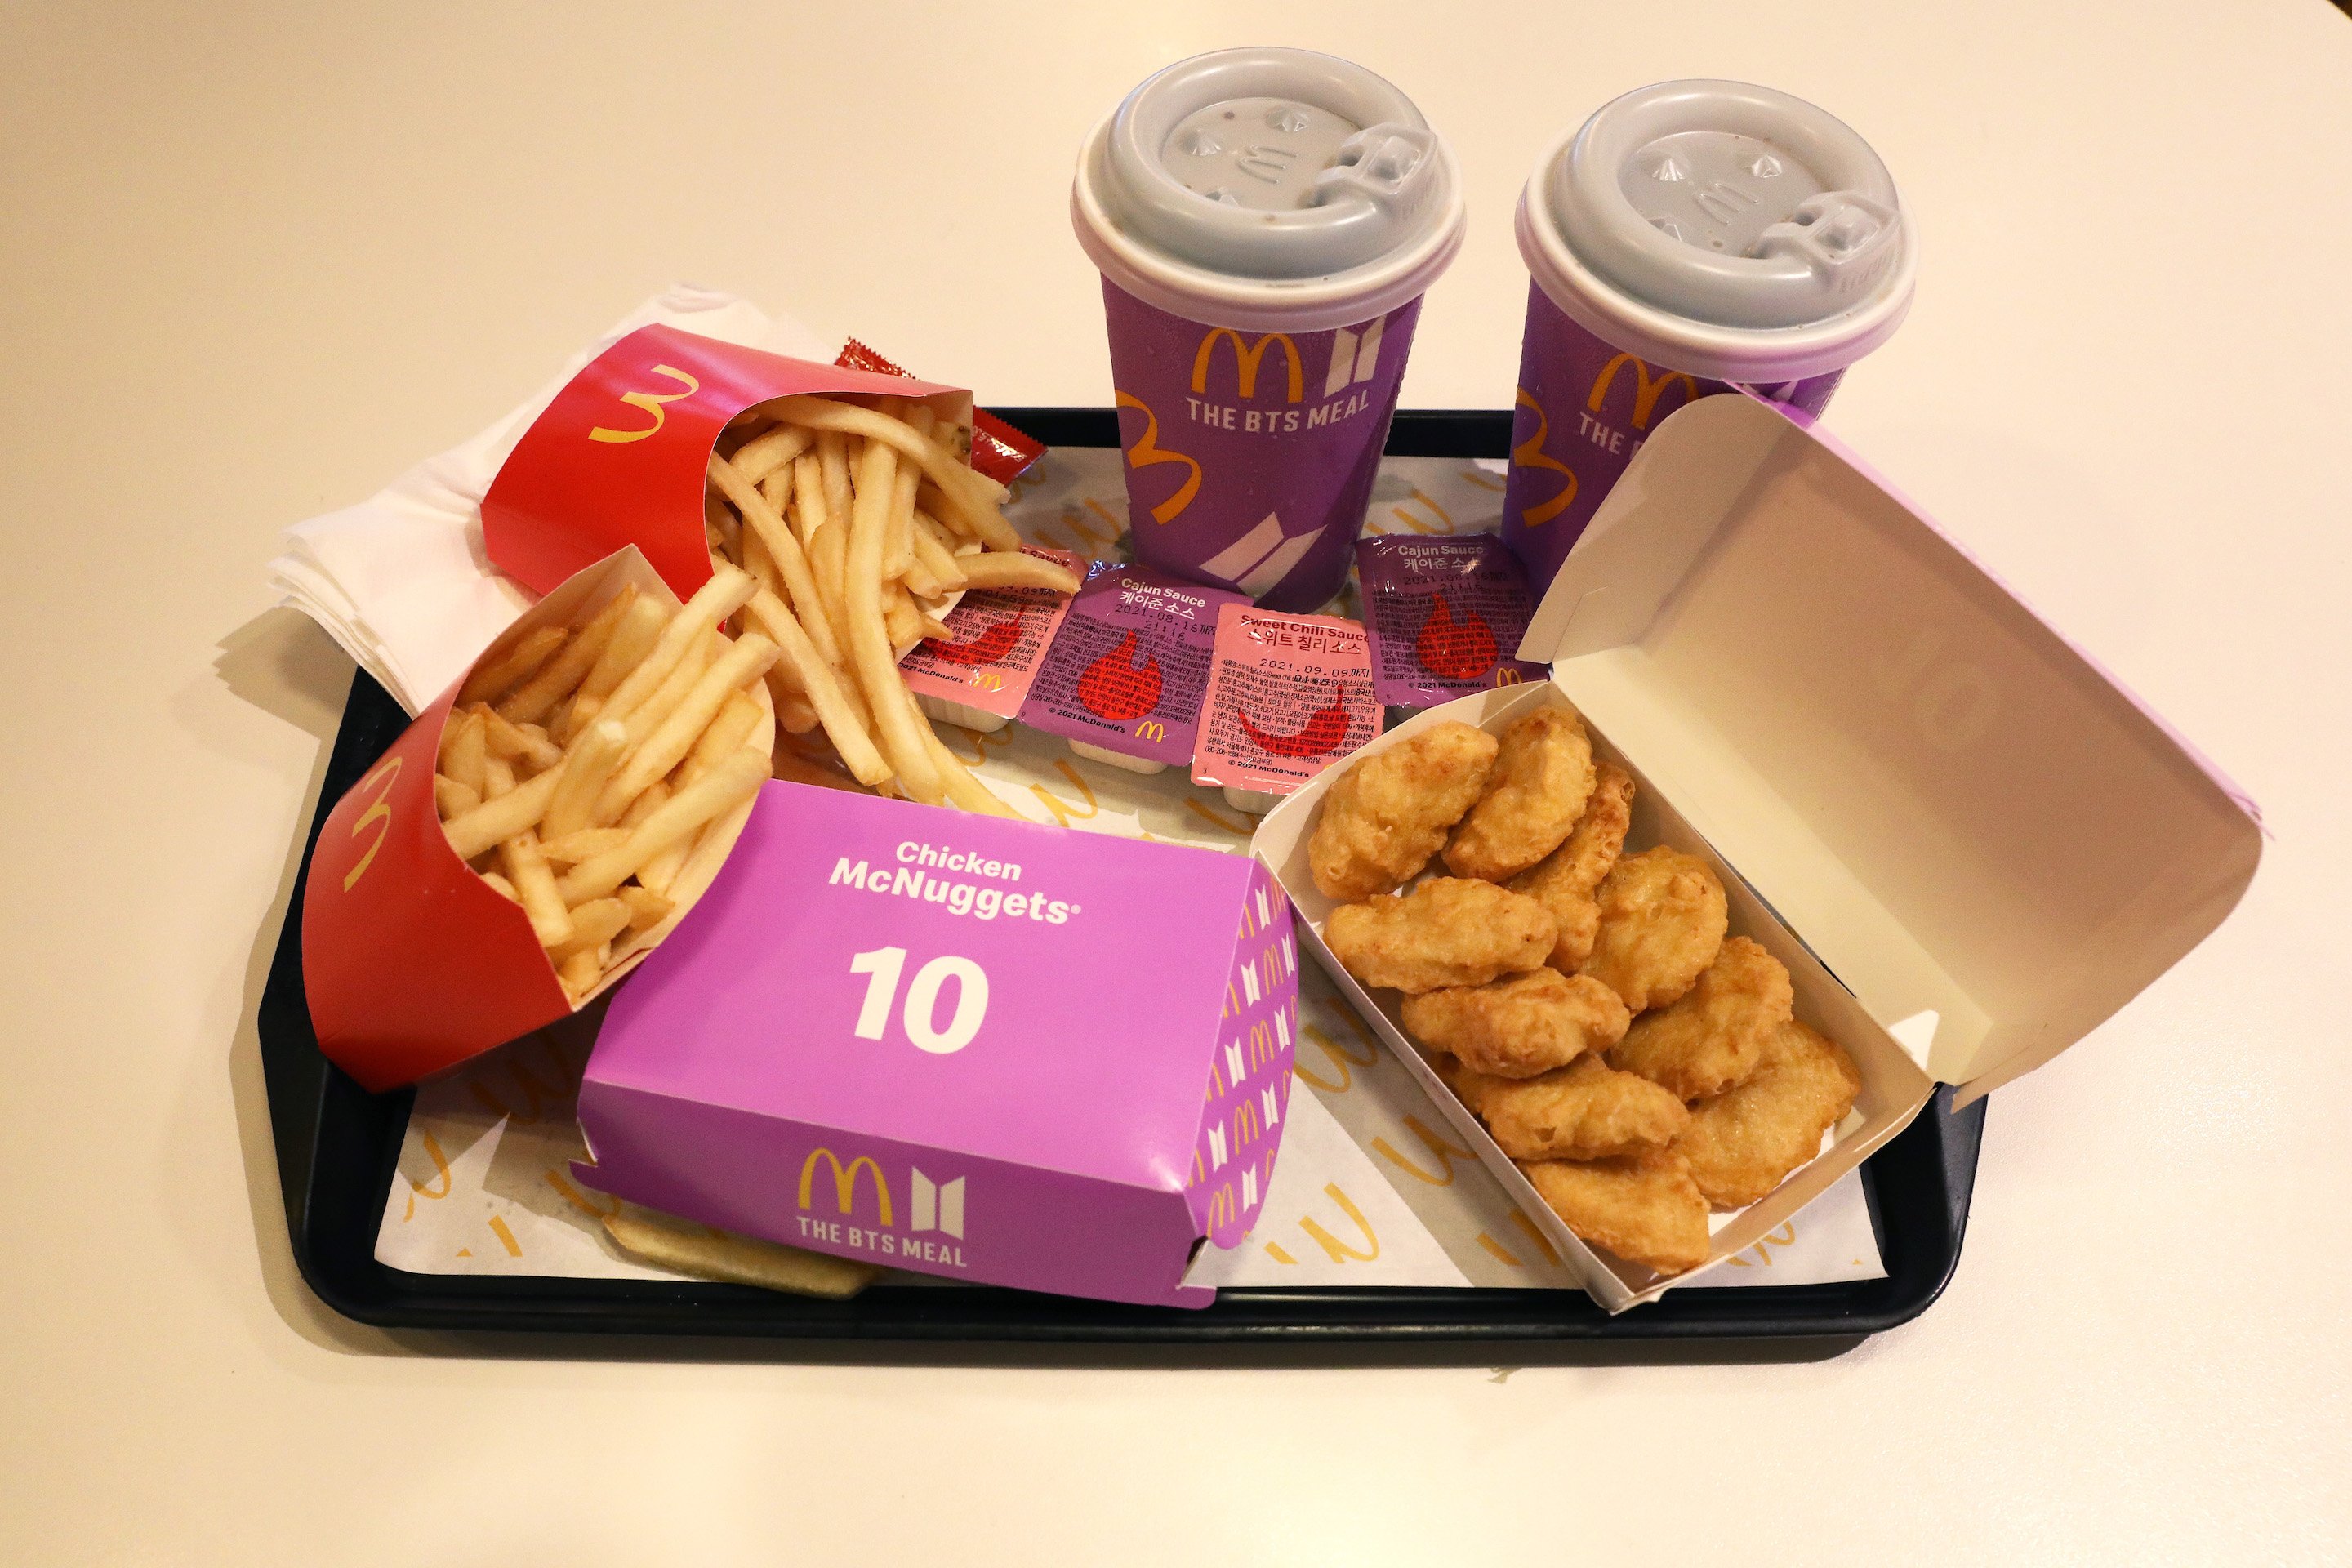 McDonald's BTS meal is seen in Seoul, South Korea